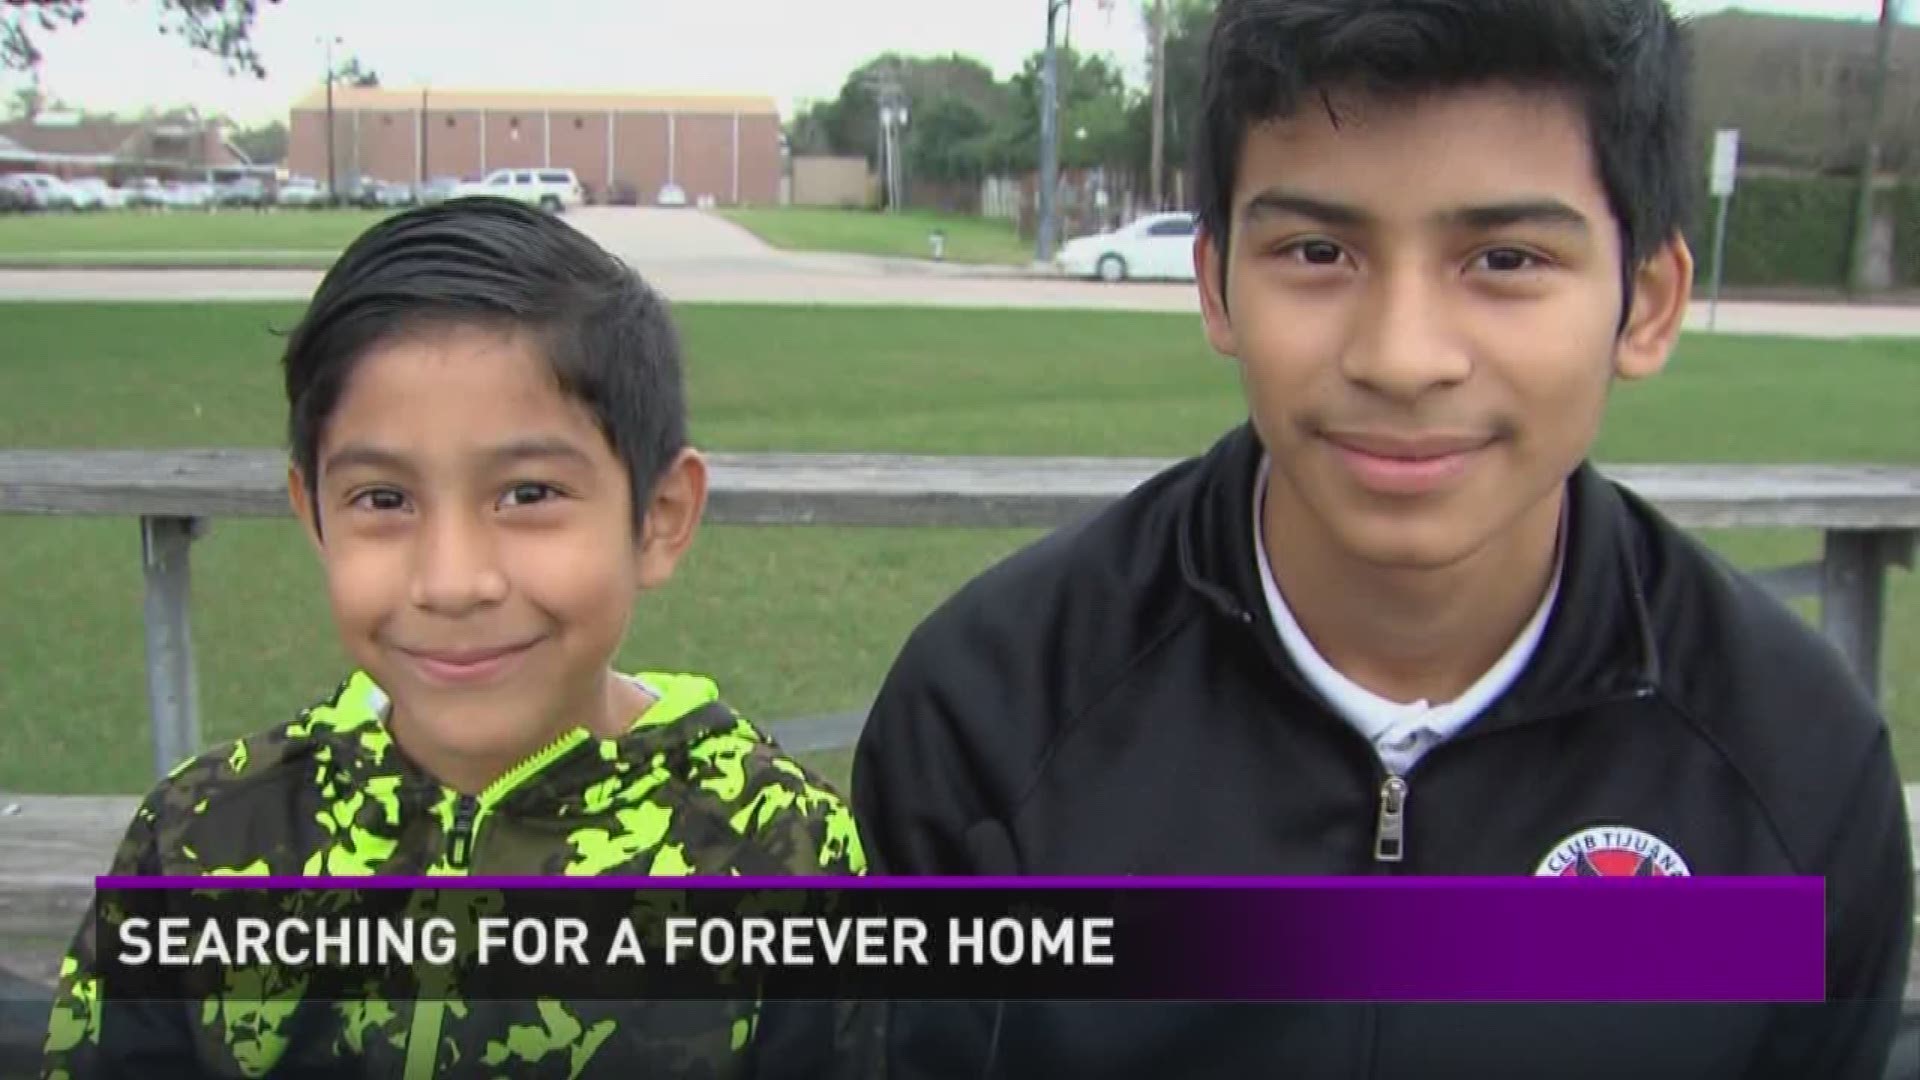 Two brothers, 13-year-old David, and 9-year-old Isaias have a strong bond who are hoping to extend that bond to a loving "forever" family. 